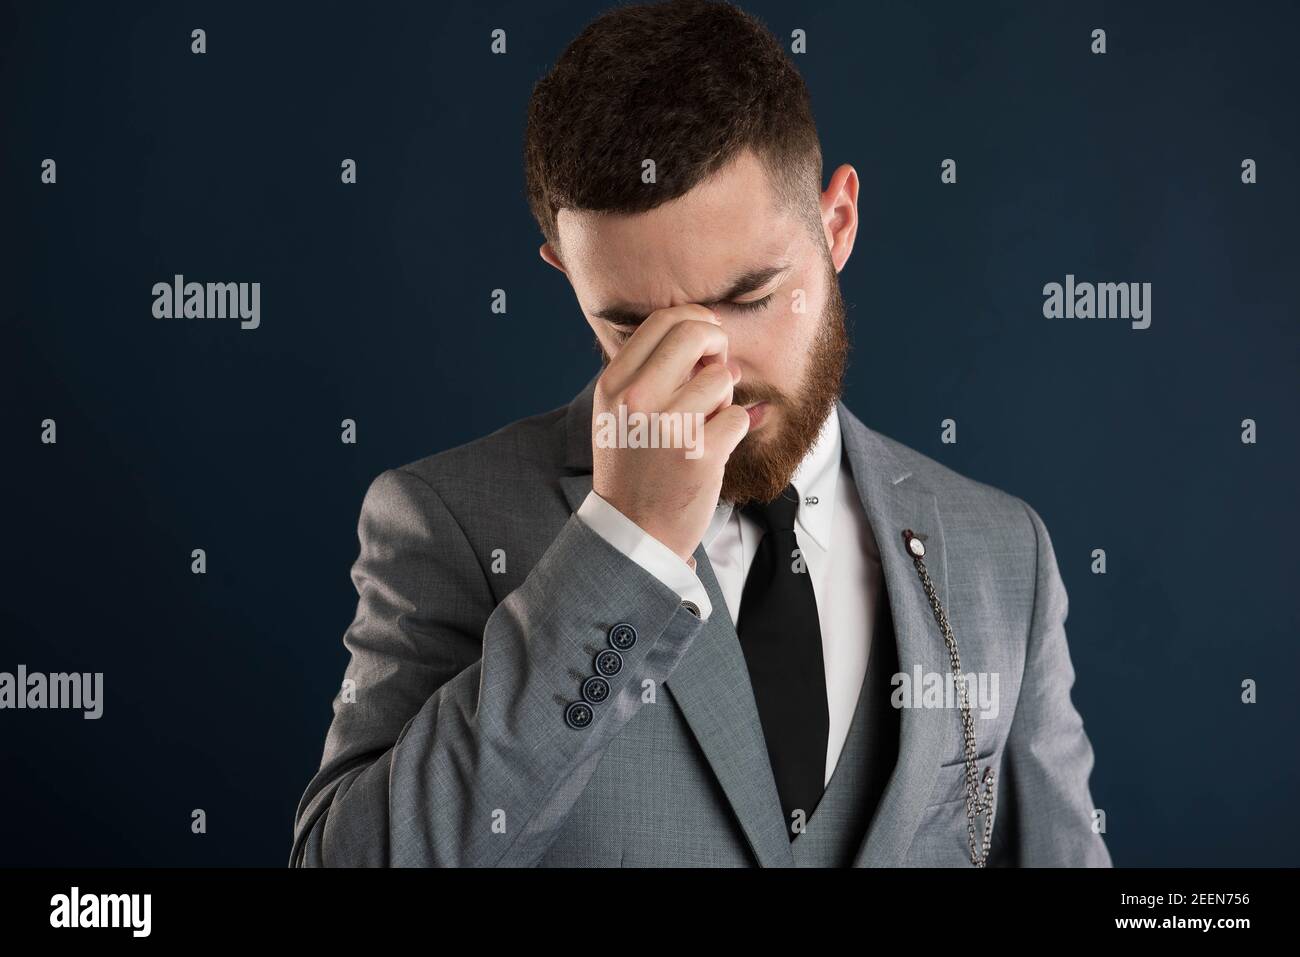 Handsome young businessman having a bad day wearing a grey suit and black tie Stock Photo